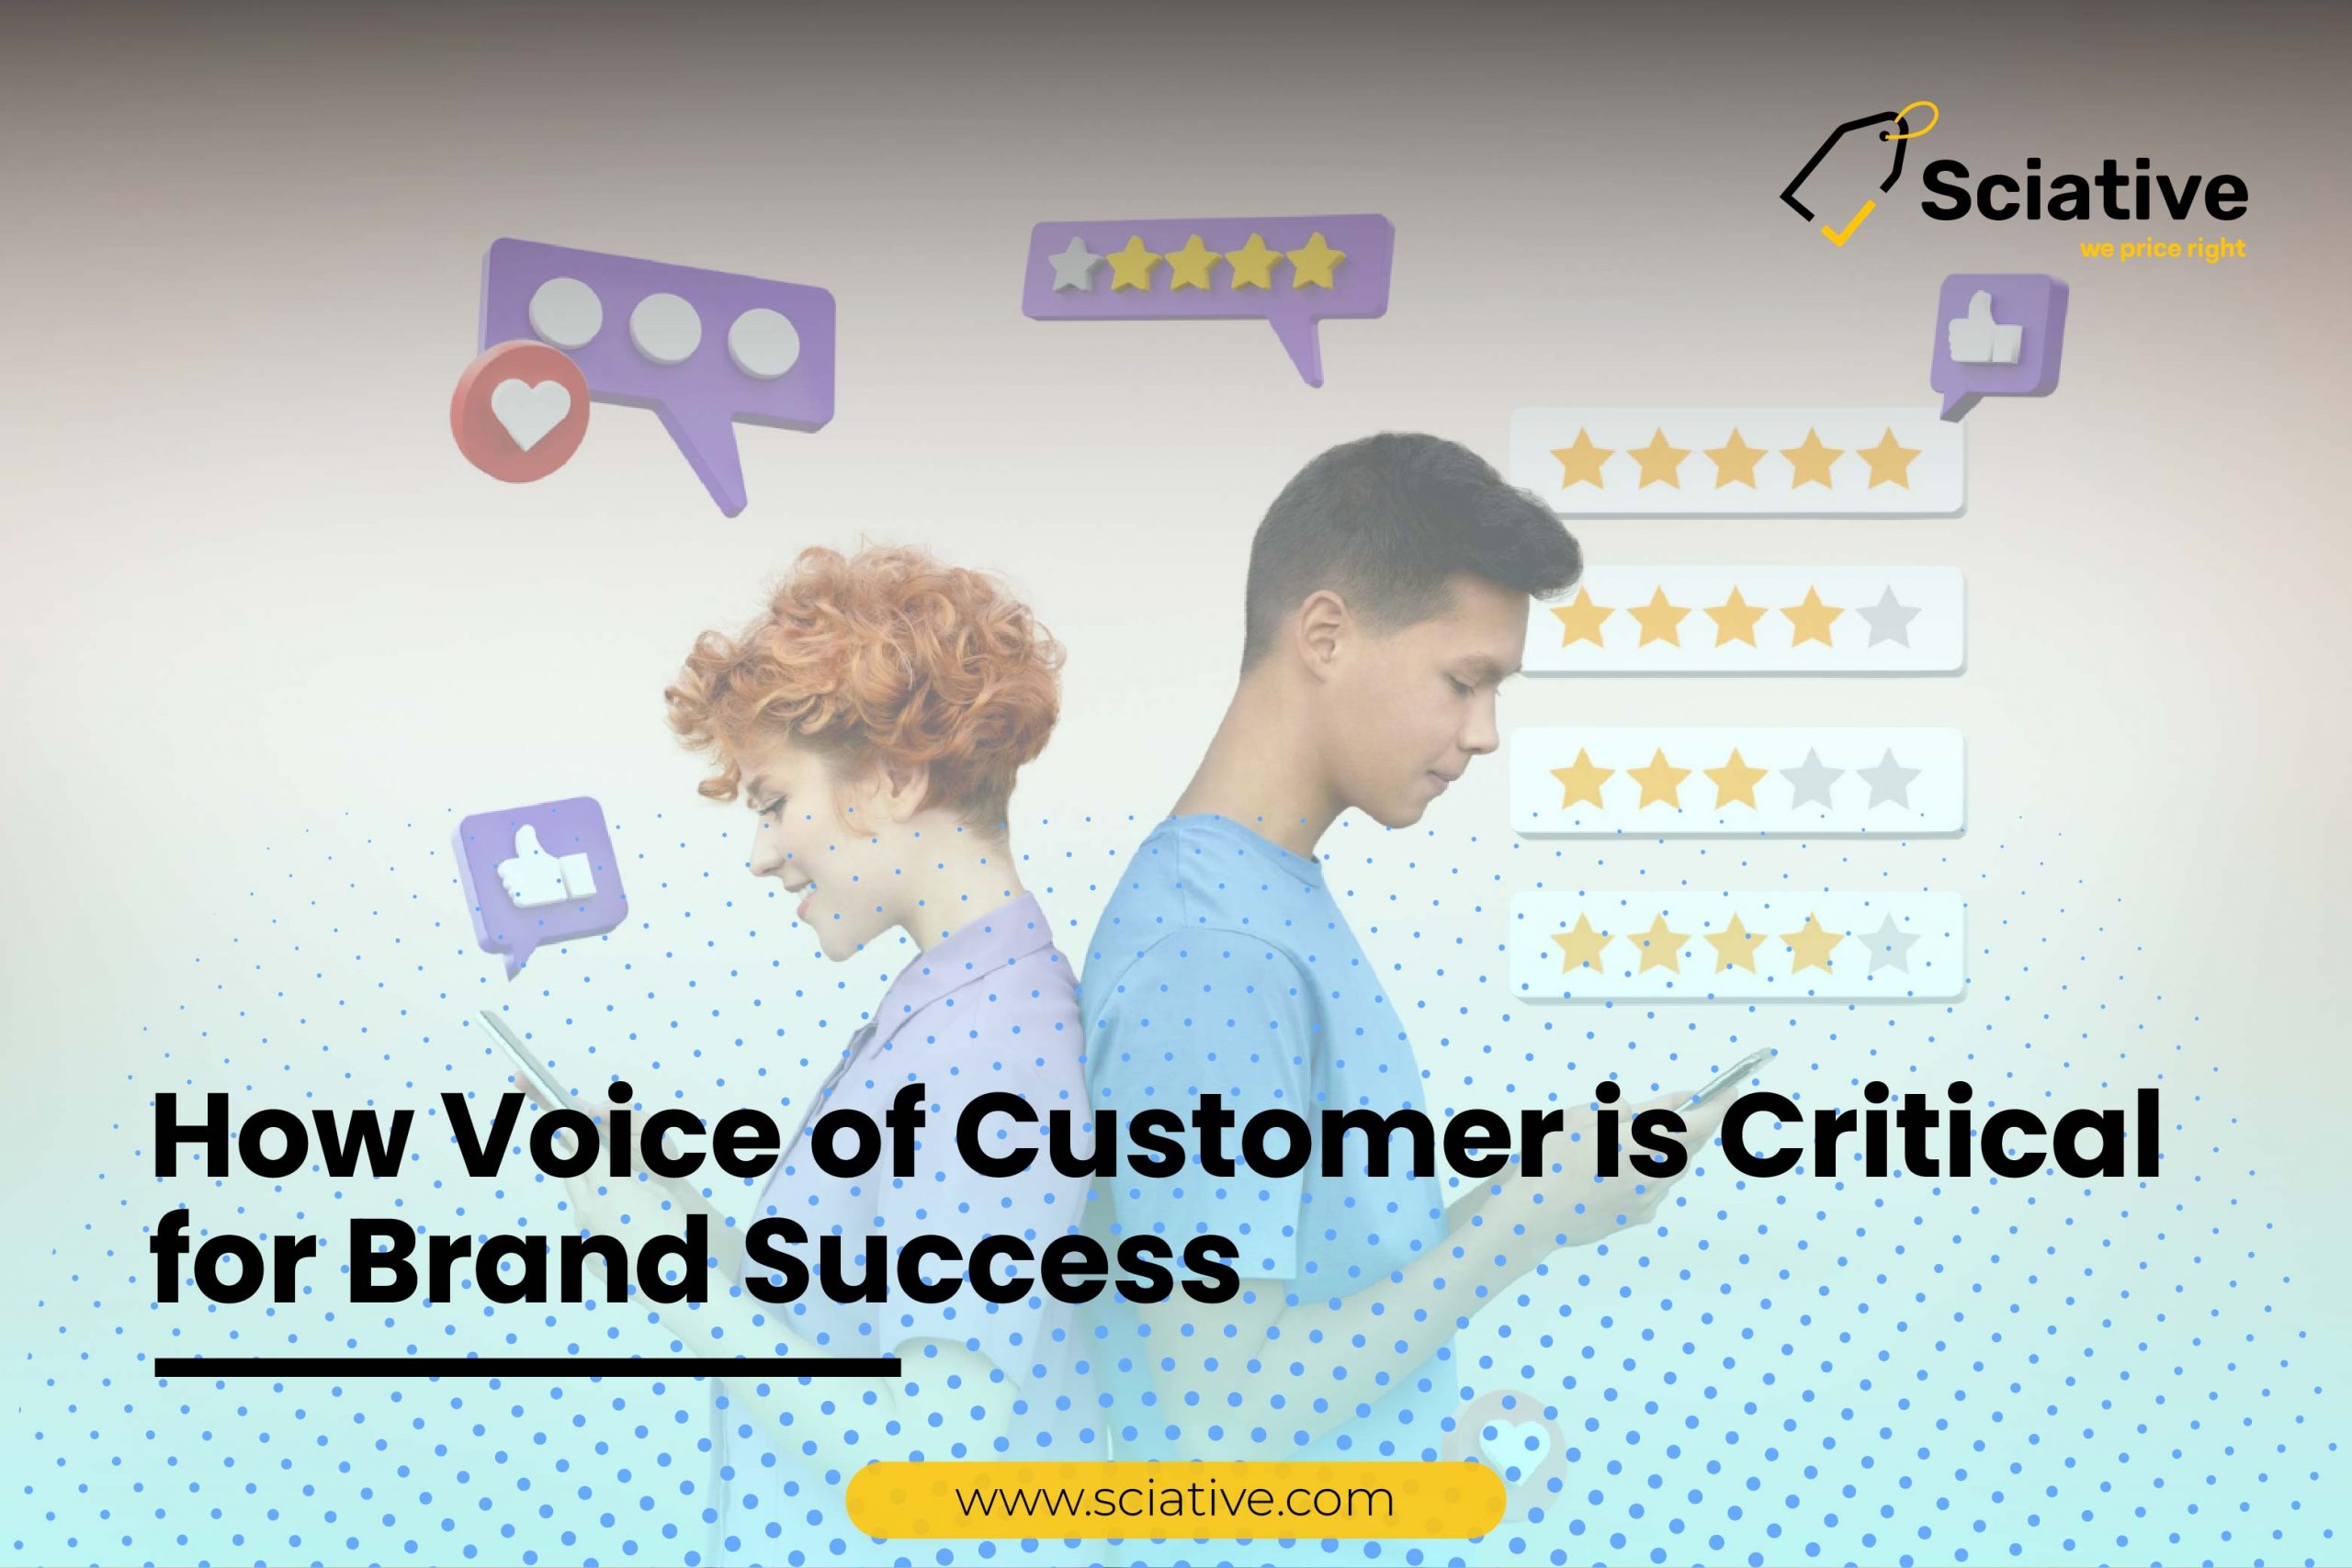 How Customer Voice is Critical for Brand Success